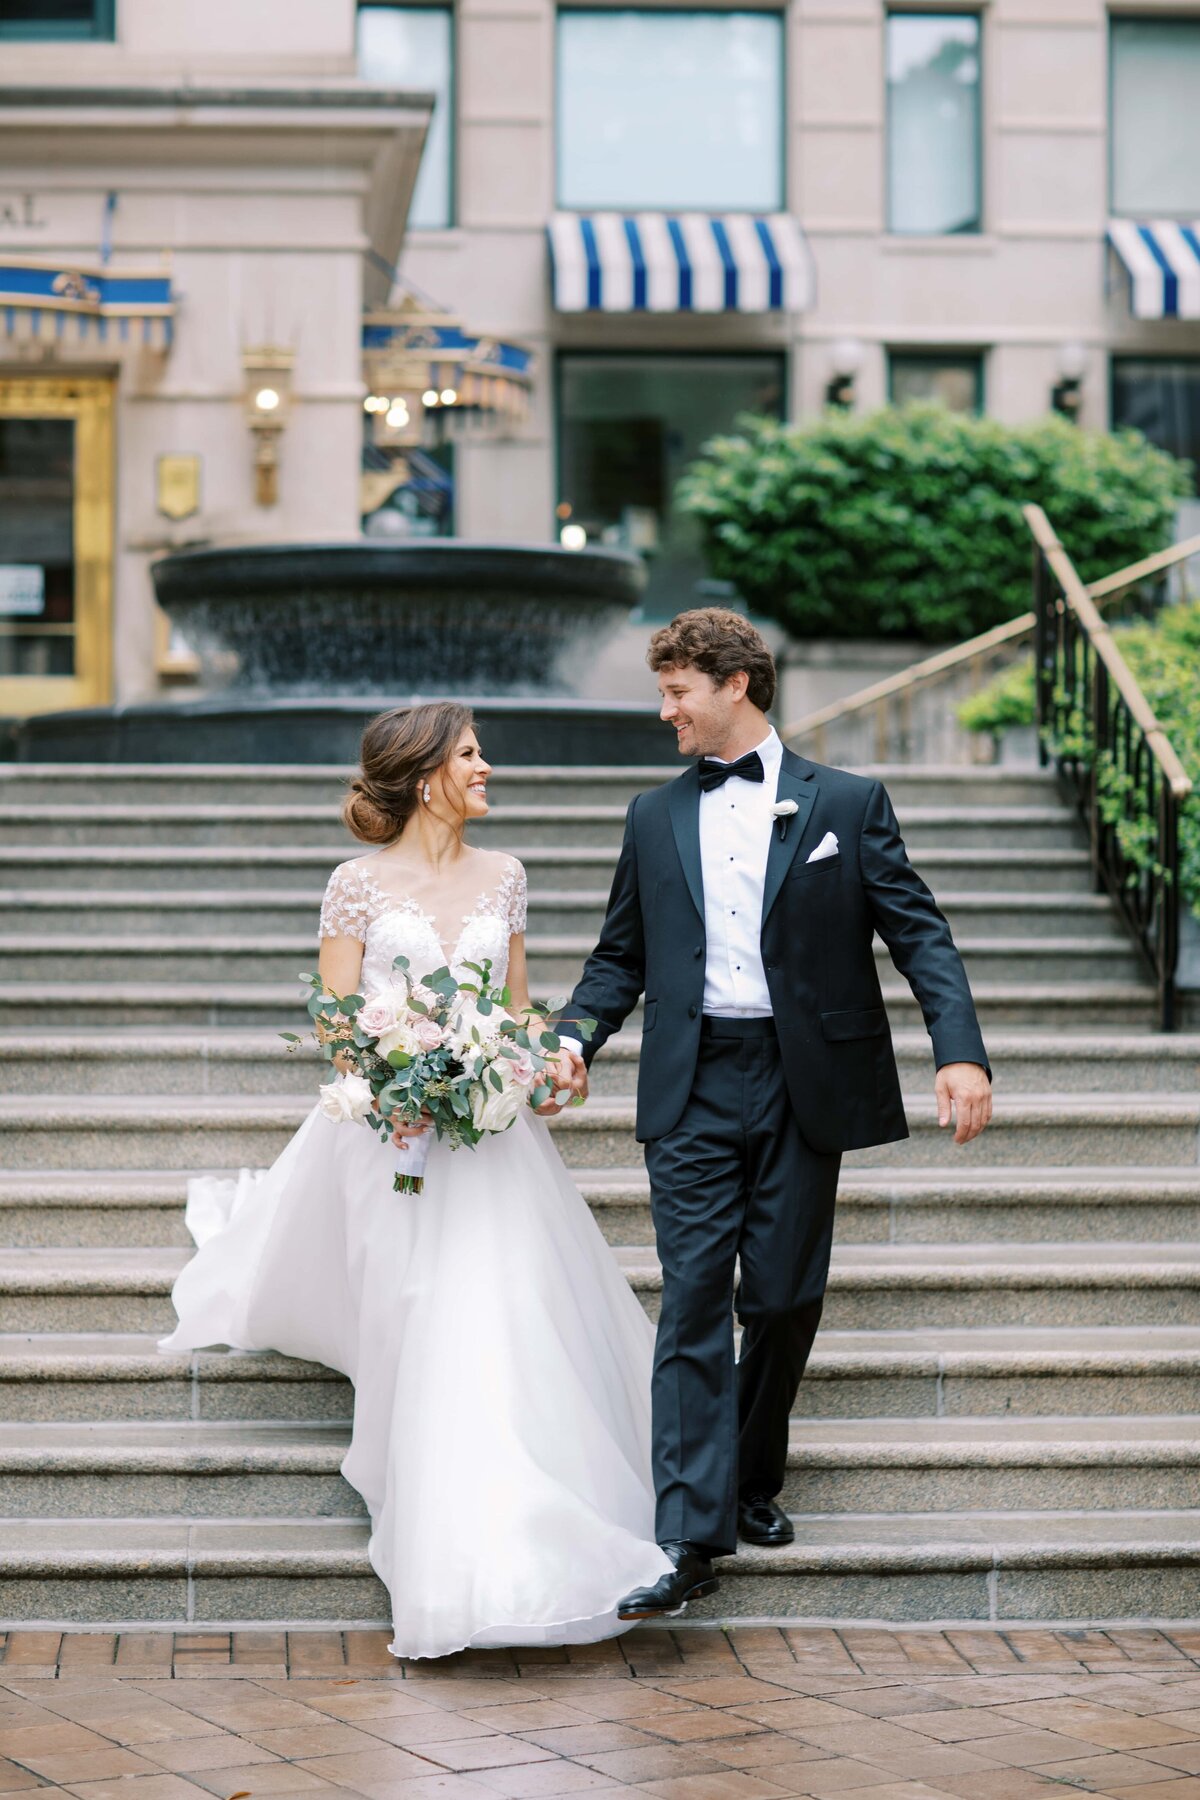 Stunning young bride with brown hair and in wedding dress holding the hand of a handsome groom in a black tux  as they smile at each other and walk down the outdoor staircase at The Willard Hotel in Washington DC